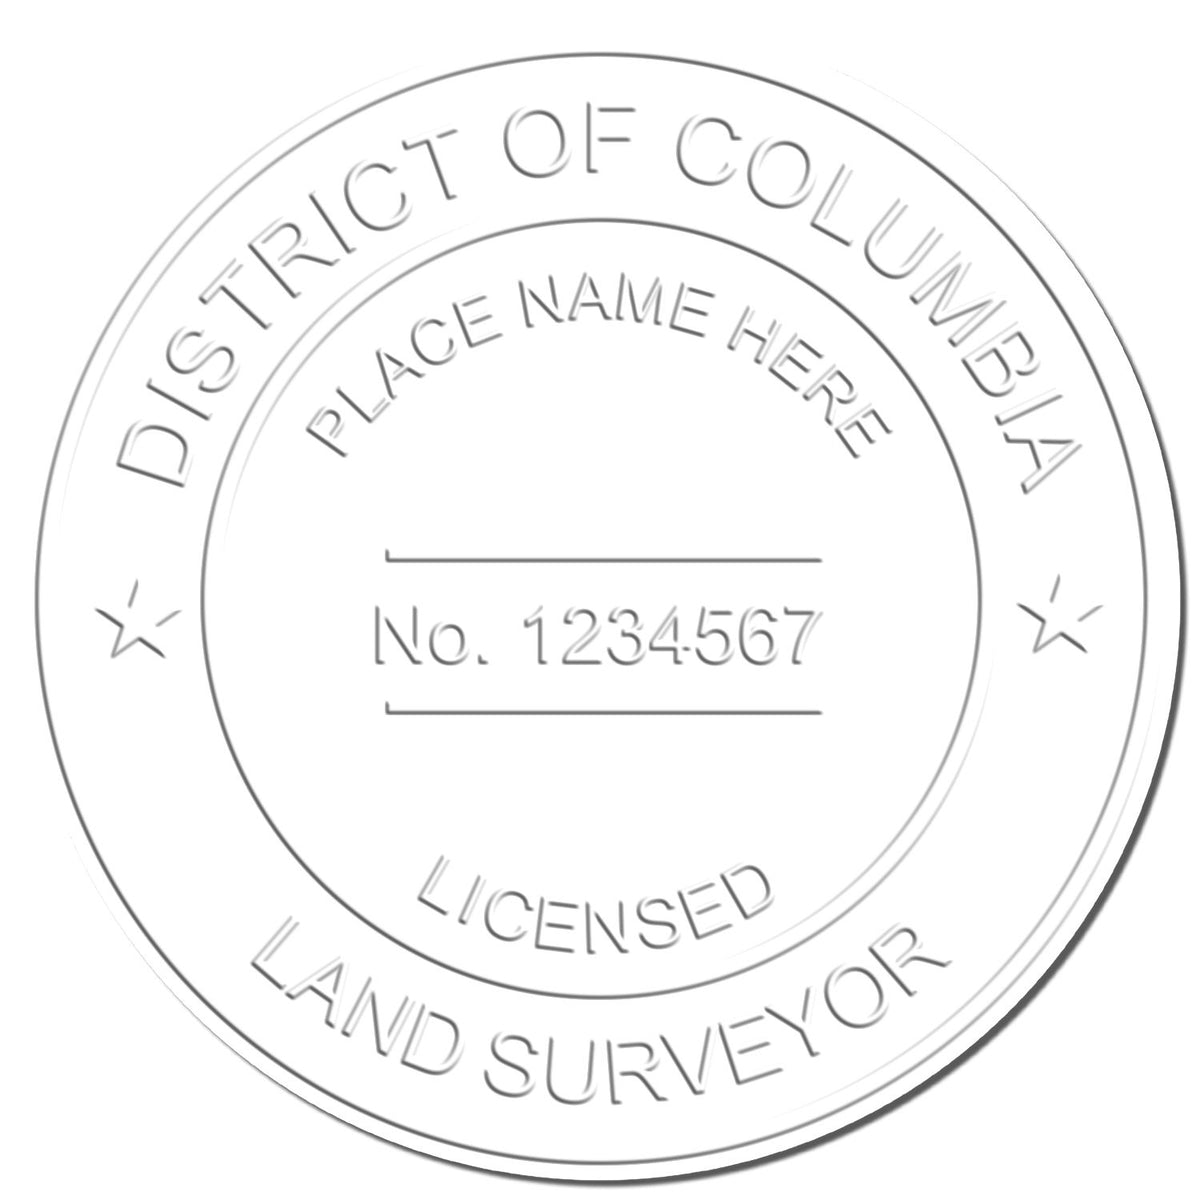 This paper is stamped with a sample imprint of the Long Reach District of Columbia Land Surveyor Seal, signifying its quality and reliability.